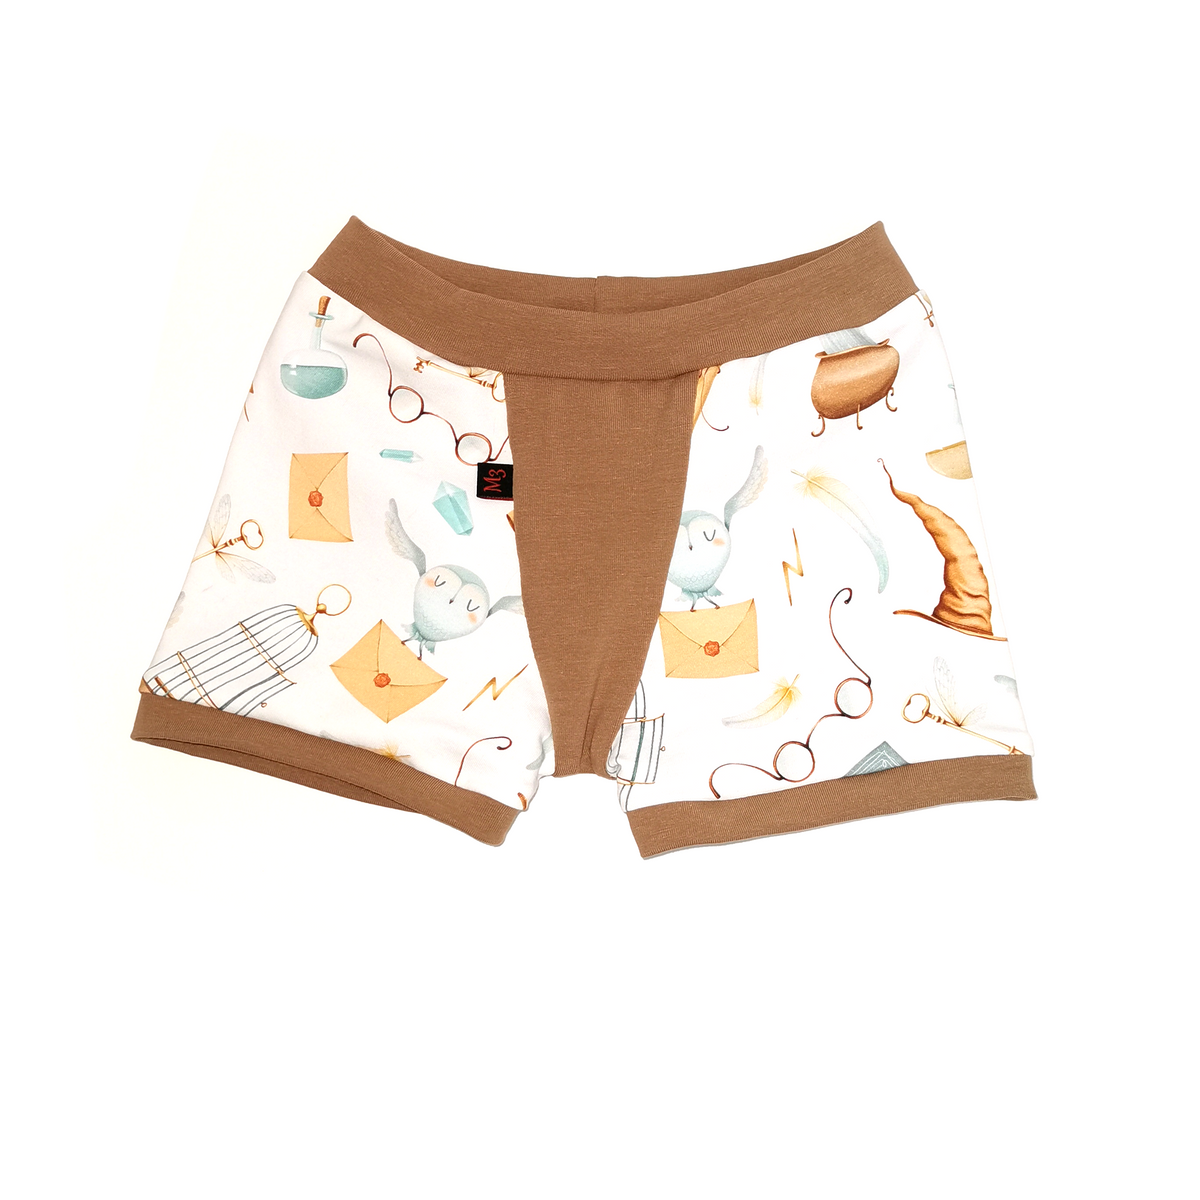 M3 Creations | Children's boxers |  School of Witchcraft (ready-to-go)